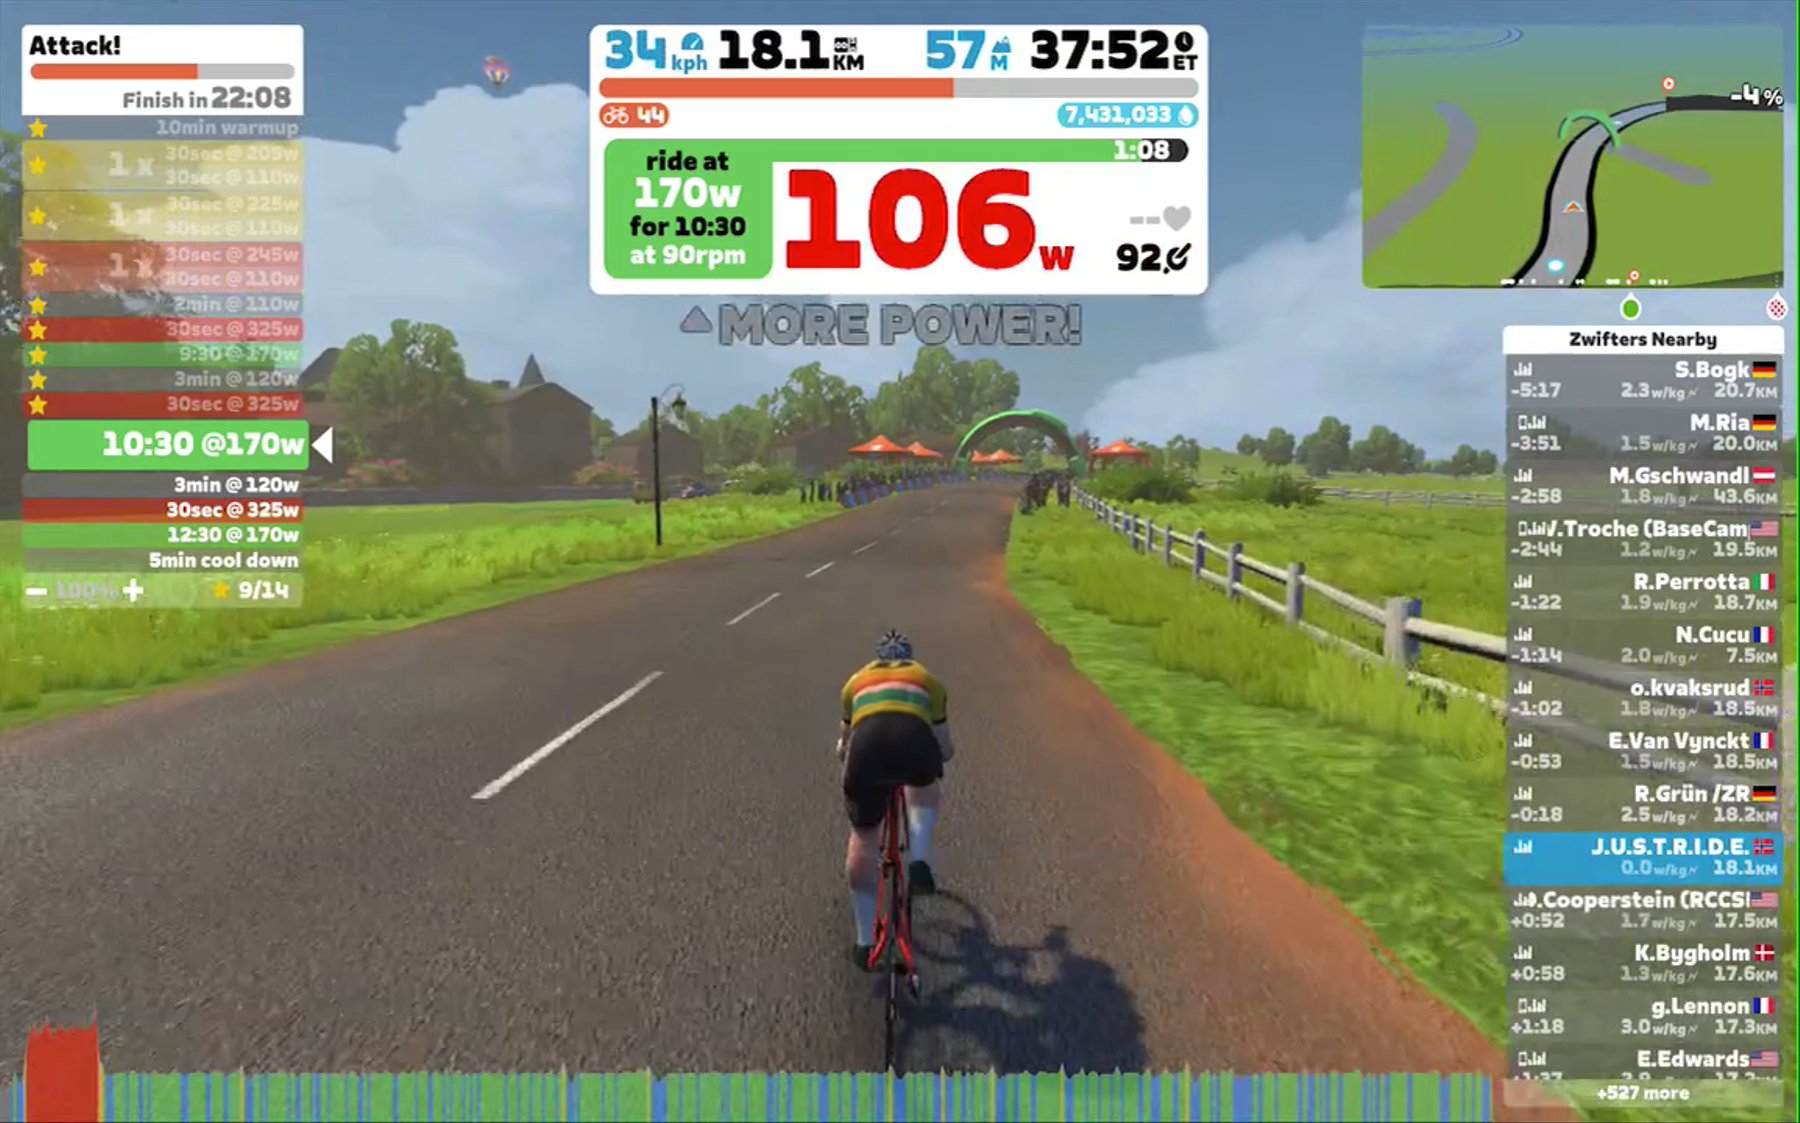 Zwift - Attack! in France